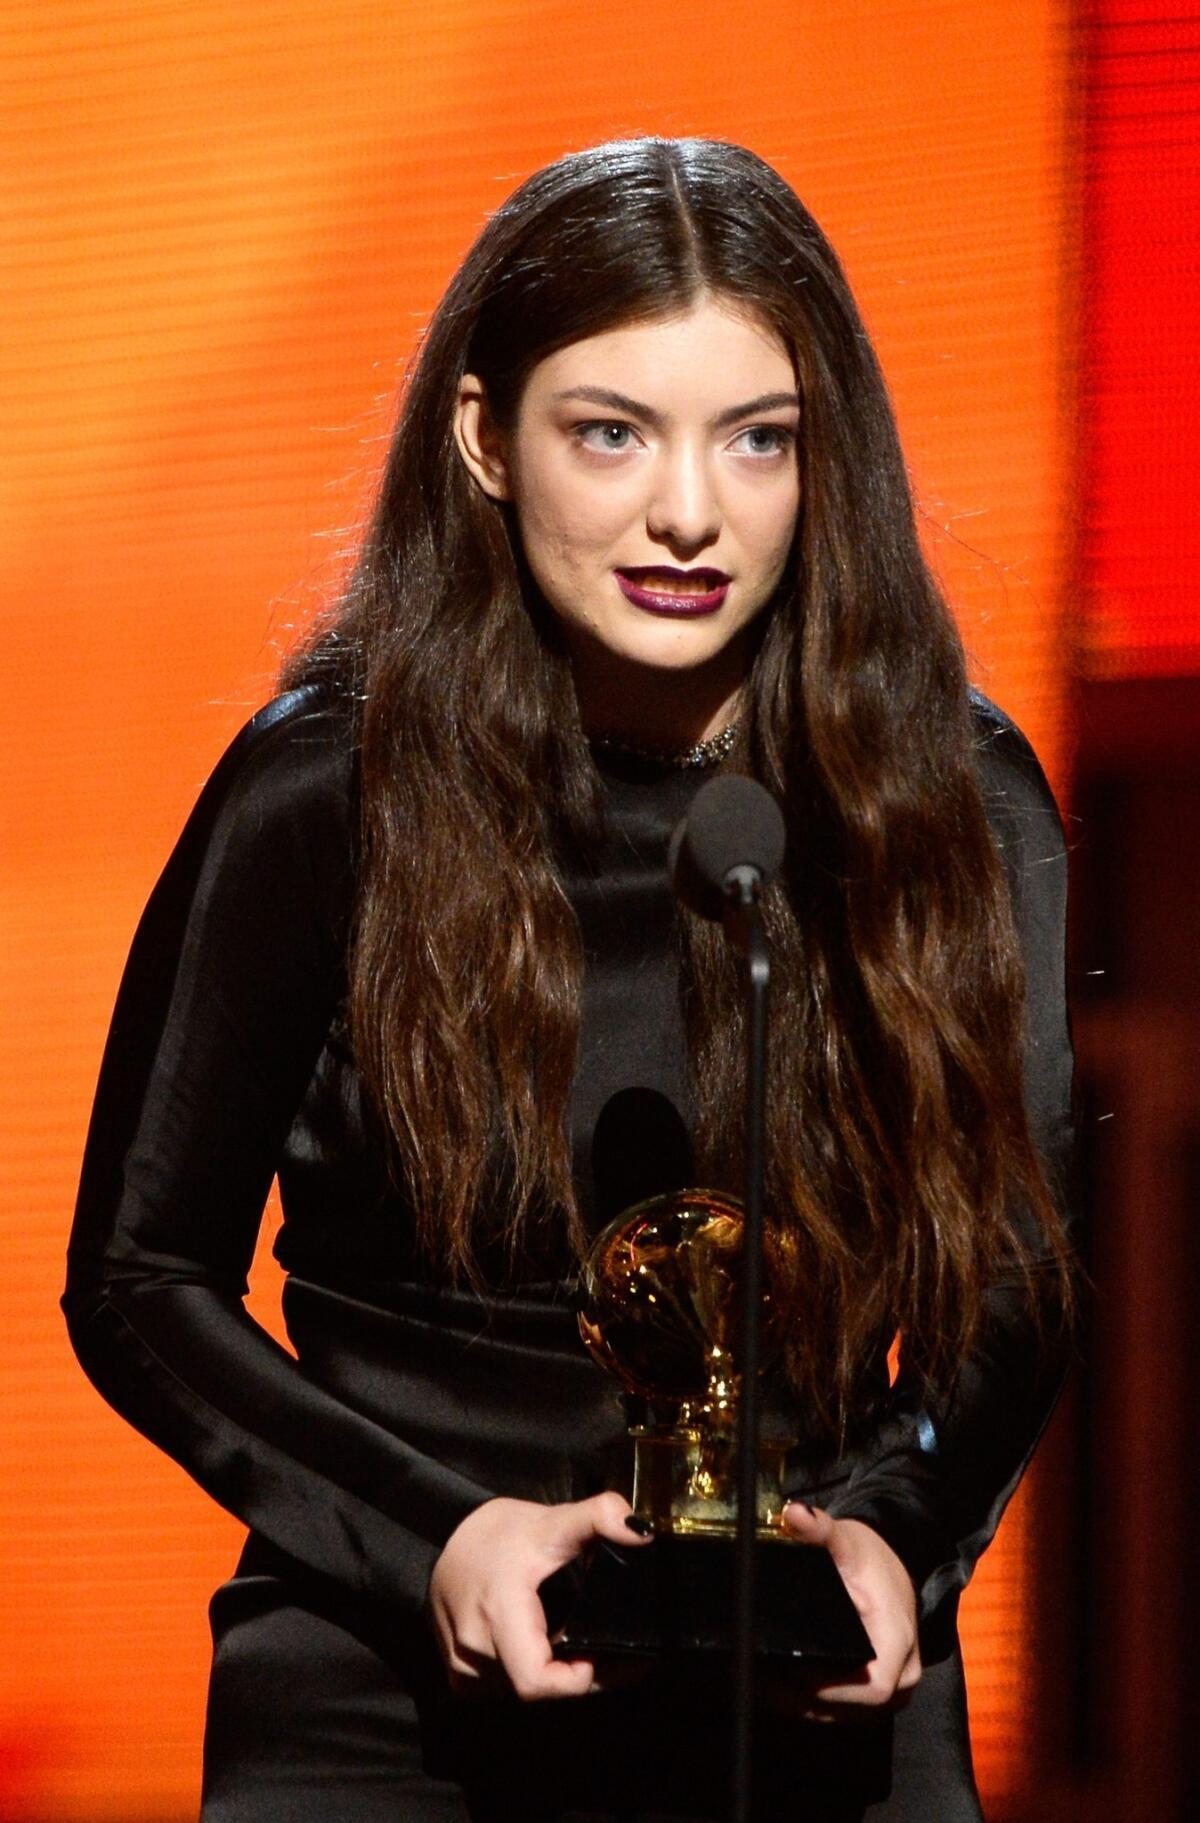 Lorde's deep purple makeup is a modern look with a focus on the lips.